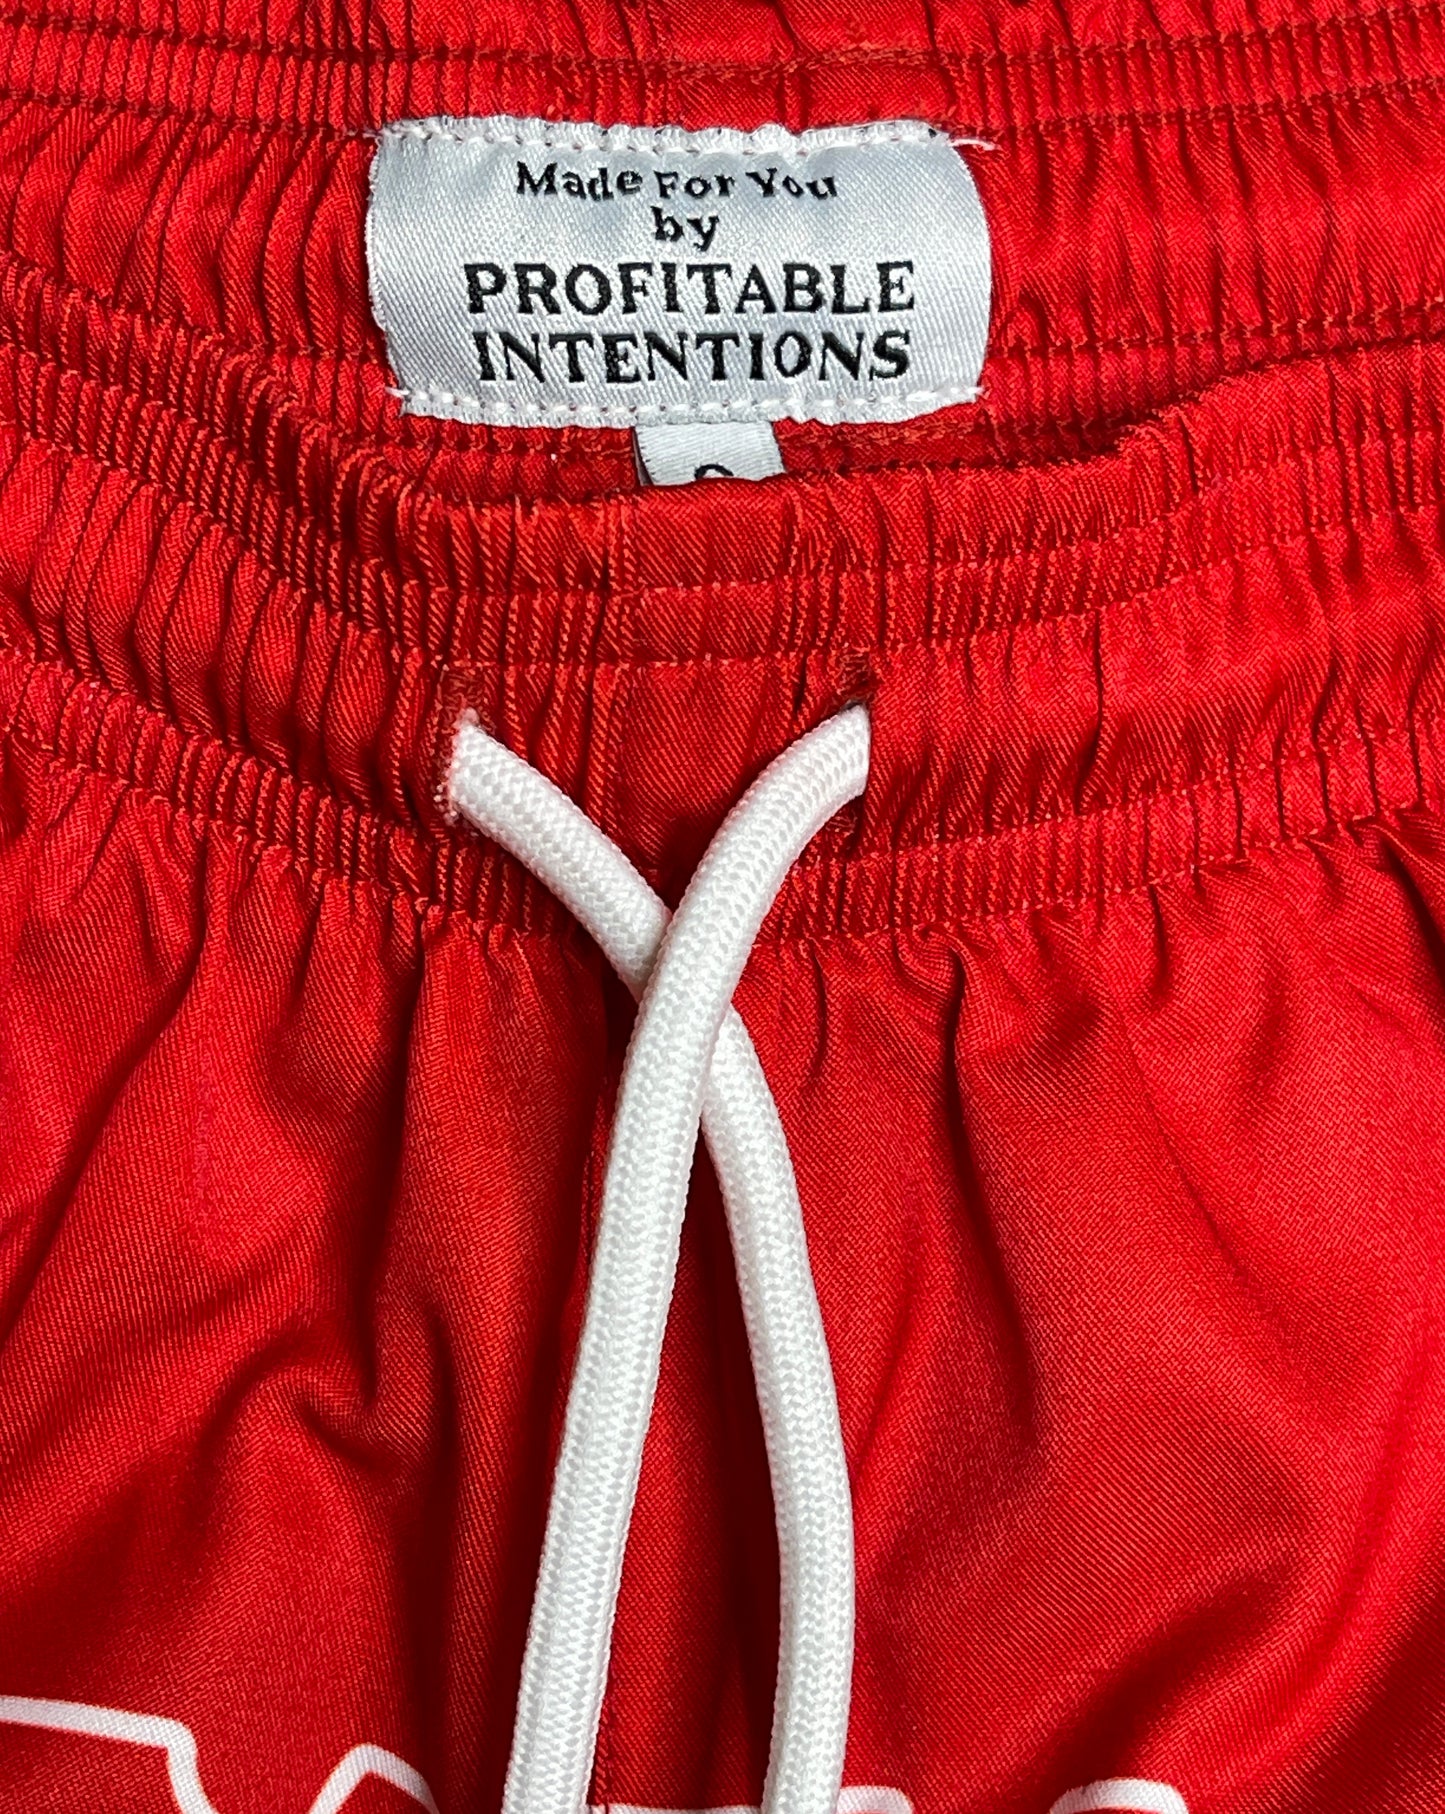 P Shorts “Racer Red”